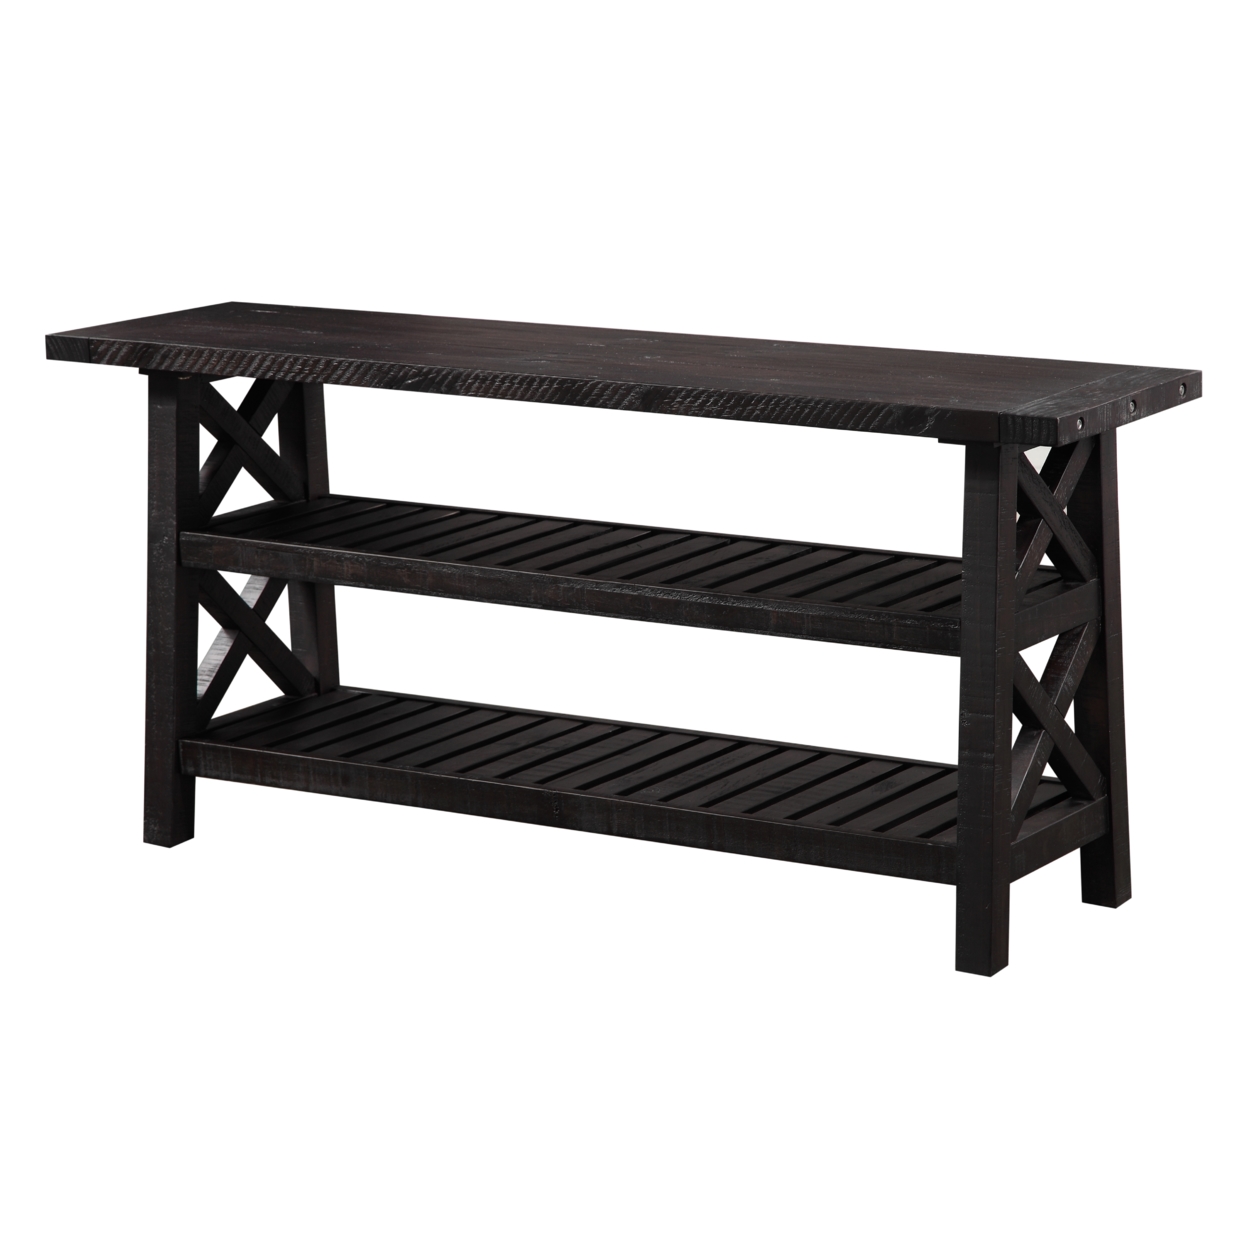 Slatted Two Tier Console Table With Cross Side Panels, Rustic Cafe Brown- Saltoro Sherpi